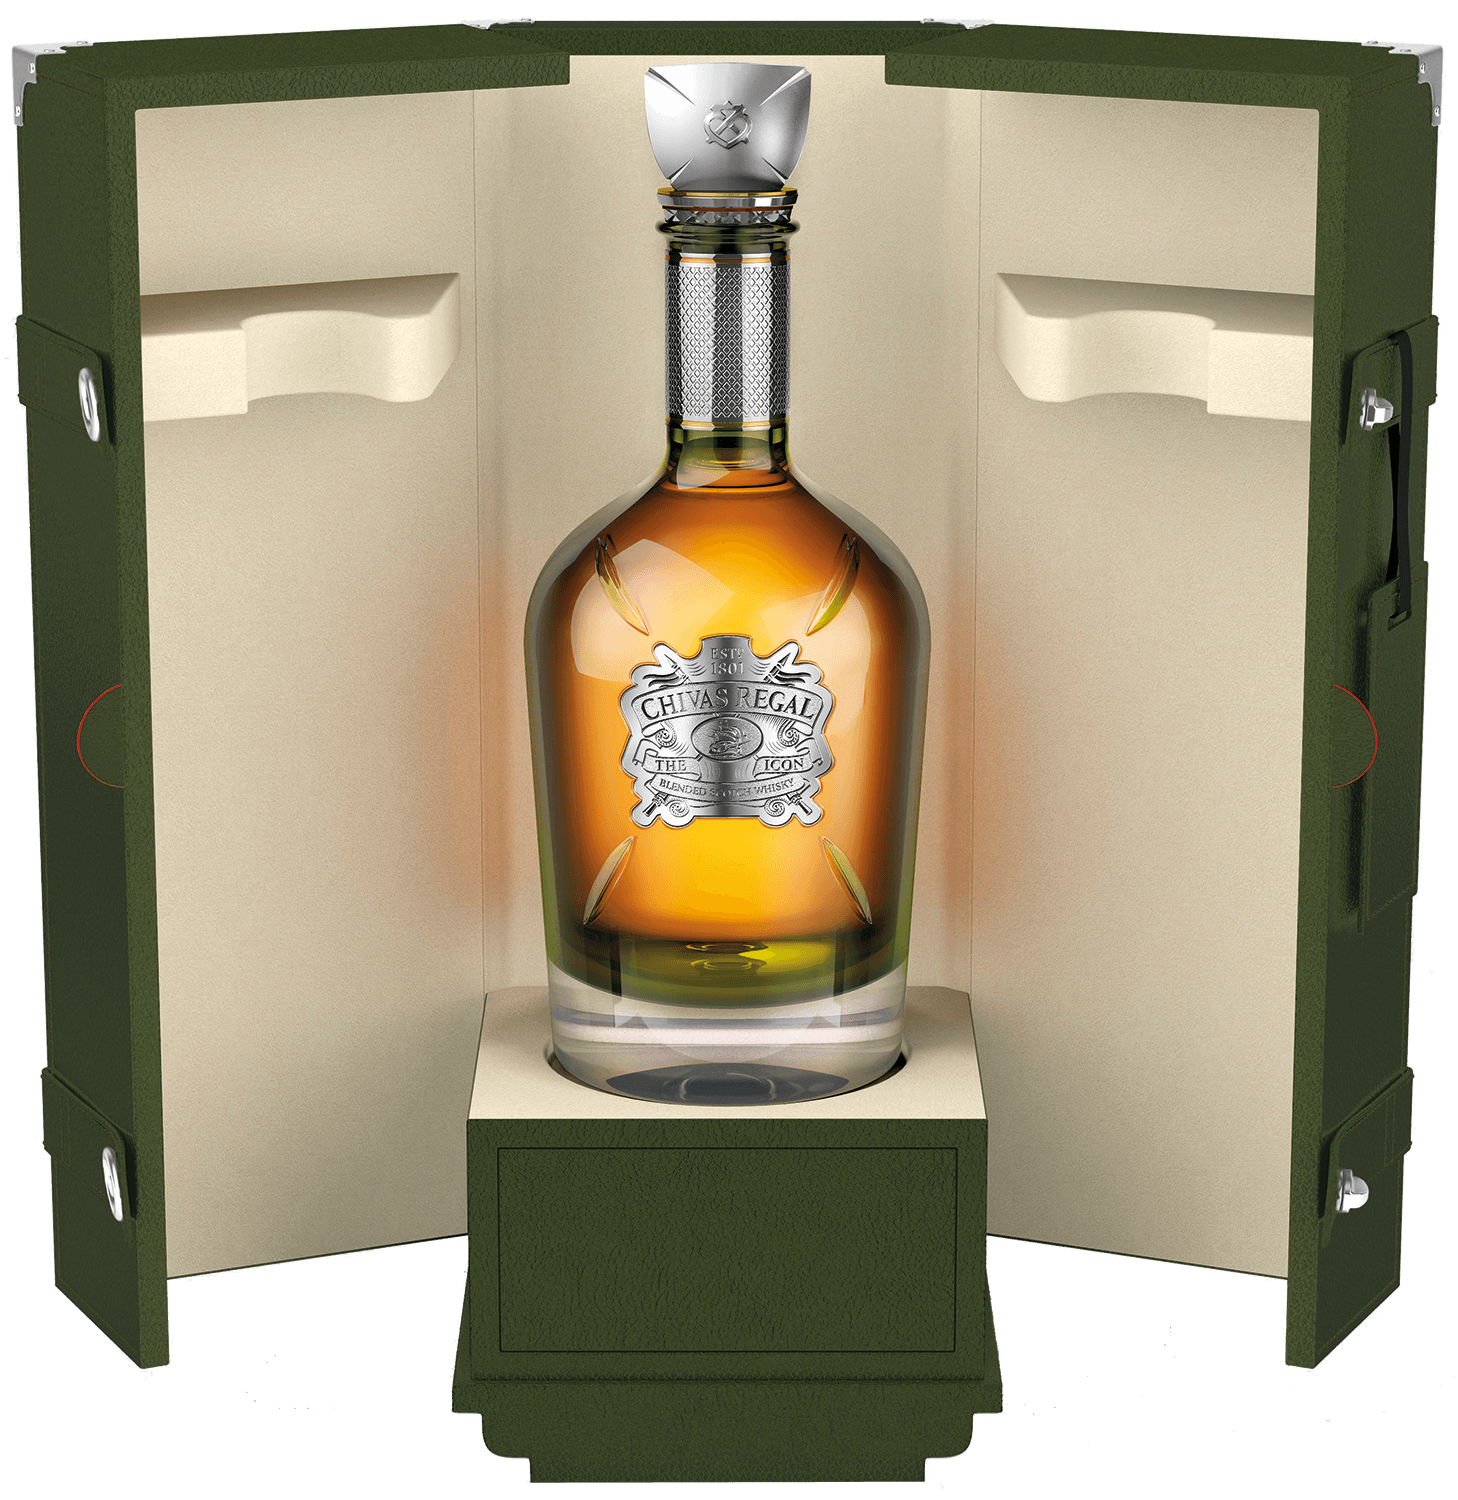 Chivas Regal Icon Blended Scotch Whisky (gift box) chivas regal extra blended scotch whisky gift box